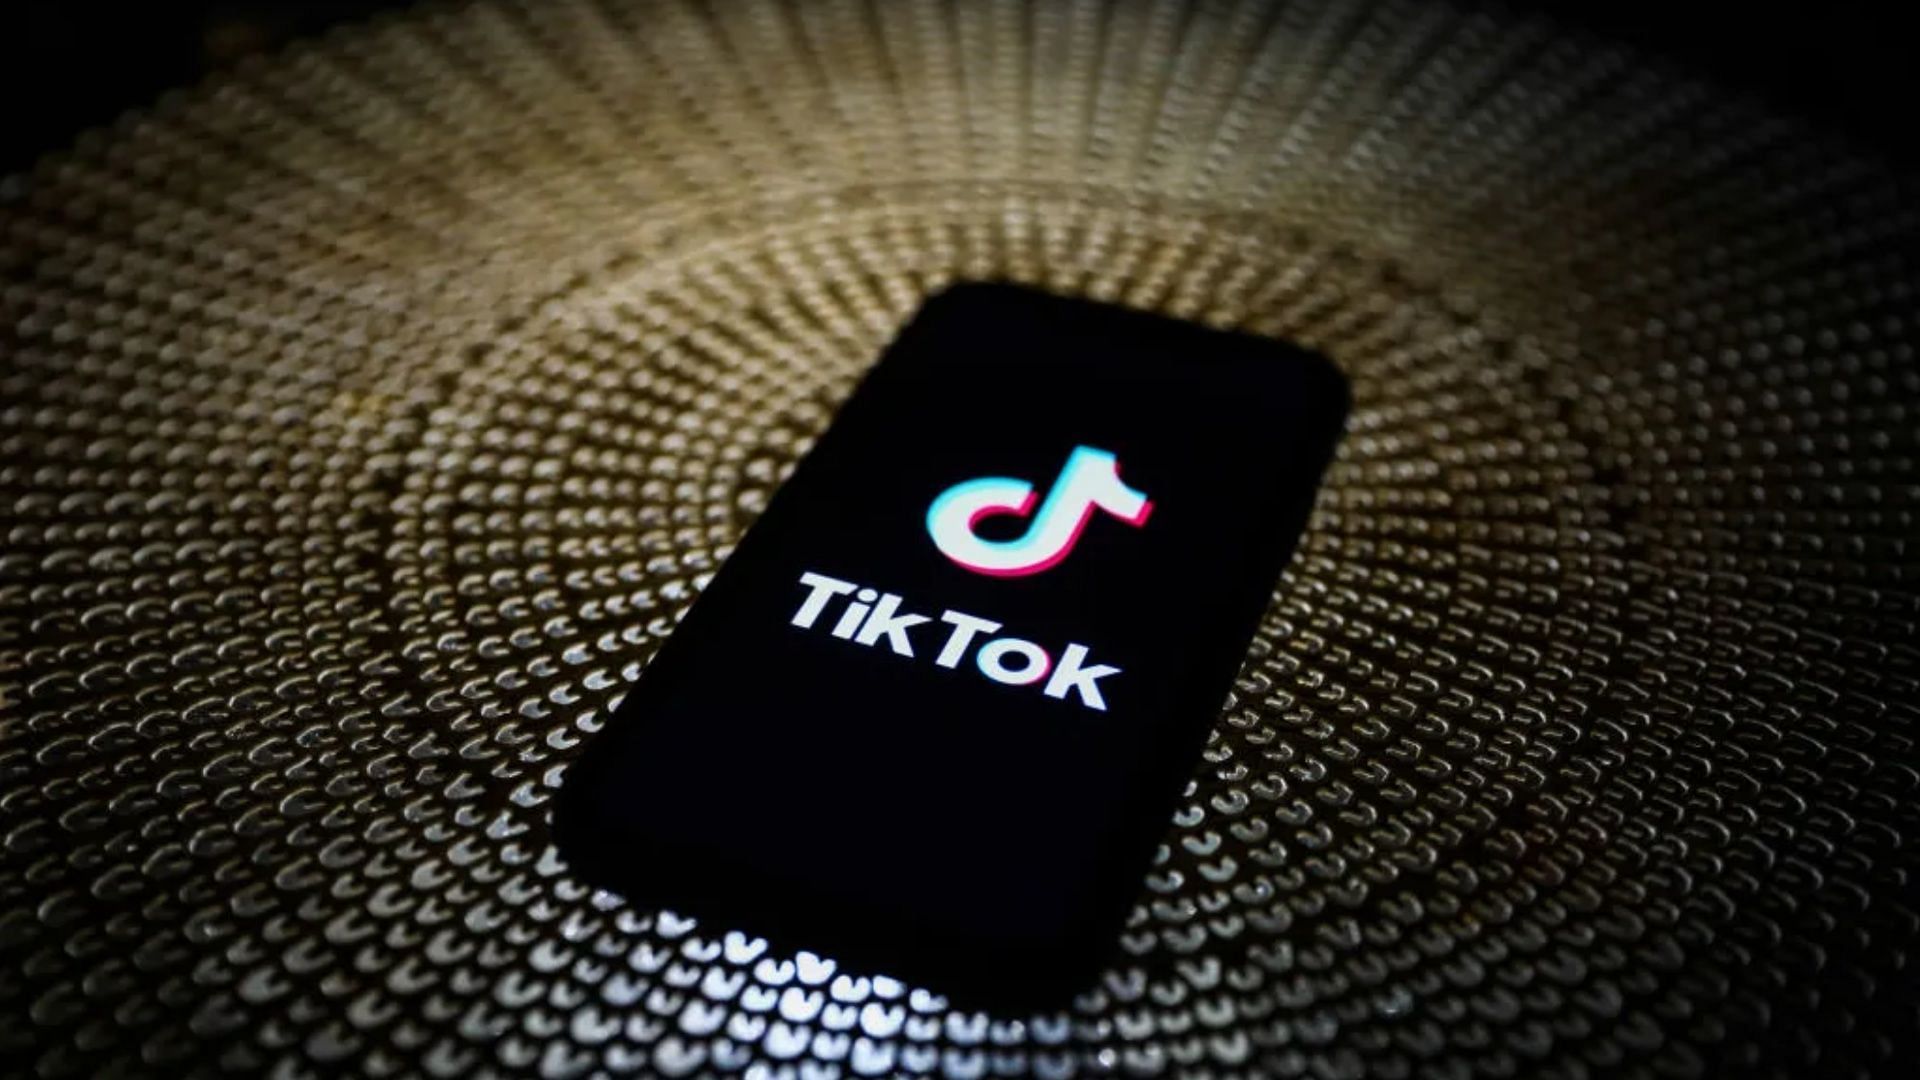 Viral Gear Swiss videos on TikTok confuse users. (Image via Getty Images)